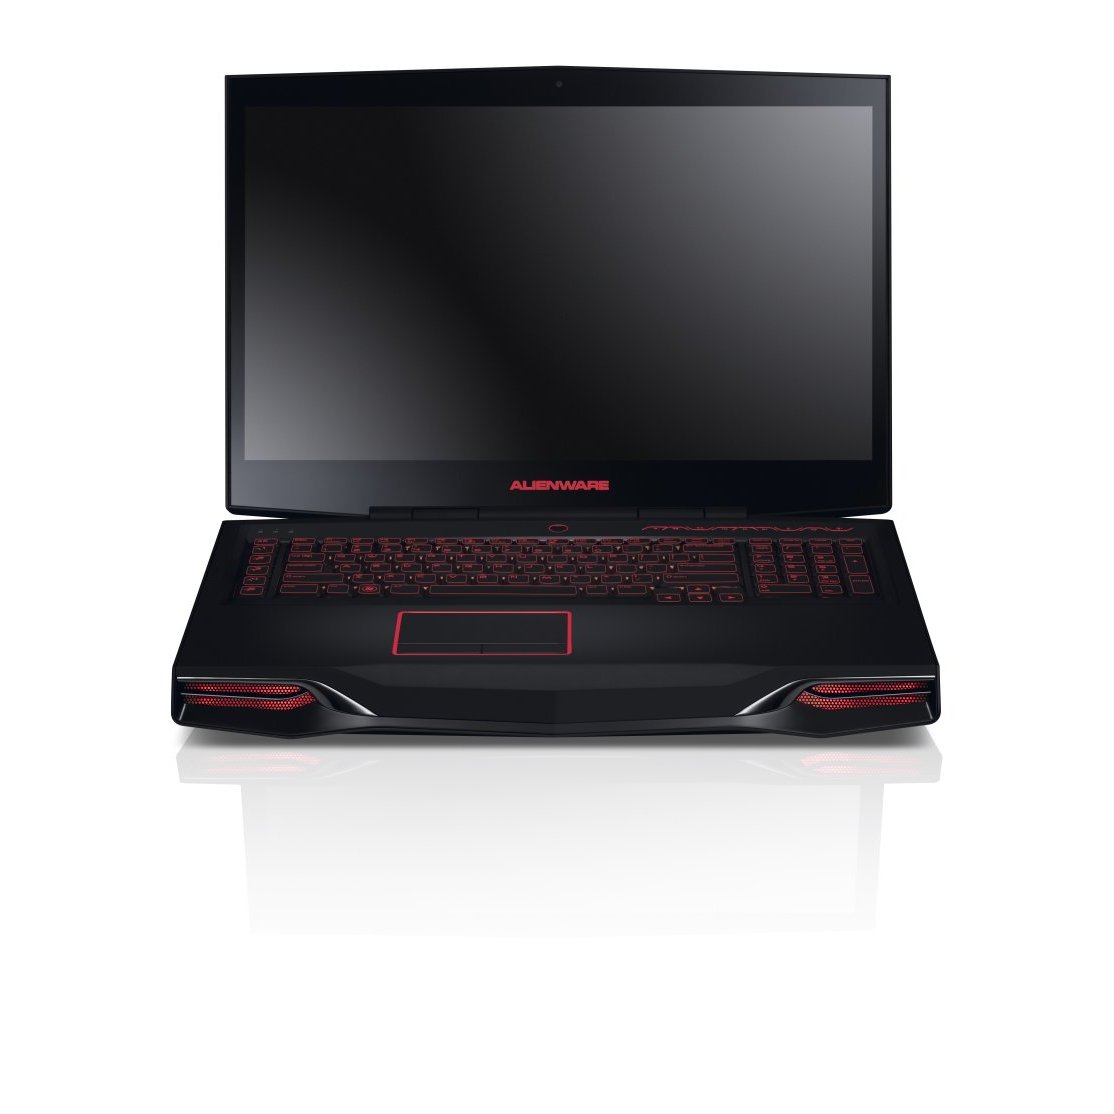 http://thetechjournal.com/wp-content/uploads/images/1206/1340513148-alienware-m17xr3-17inch-gaming-laptop-1.jpg